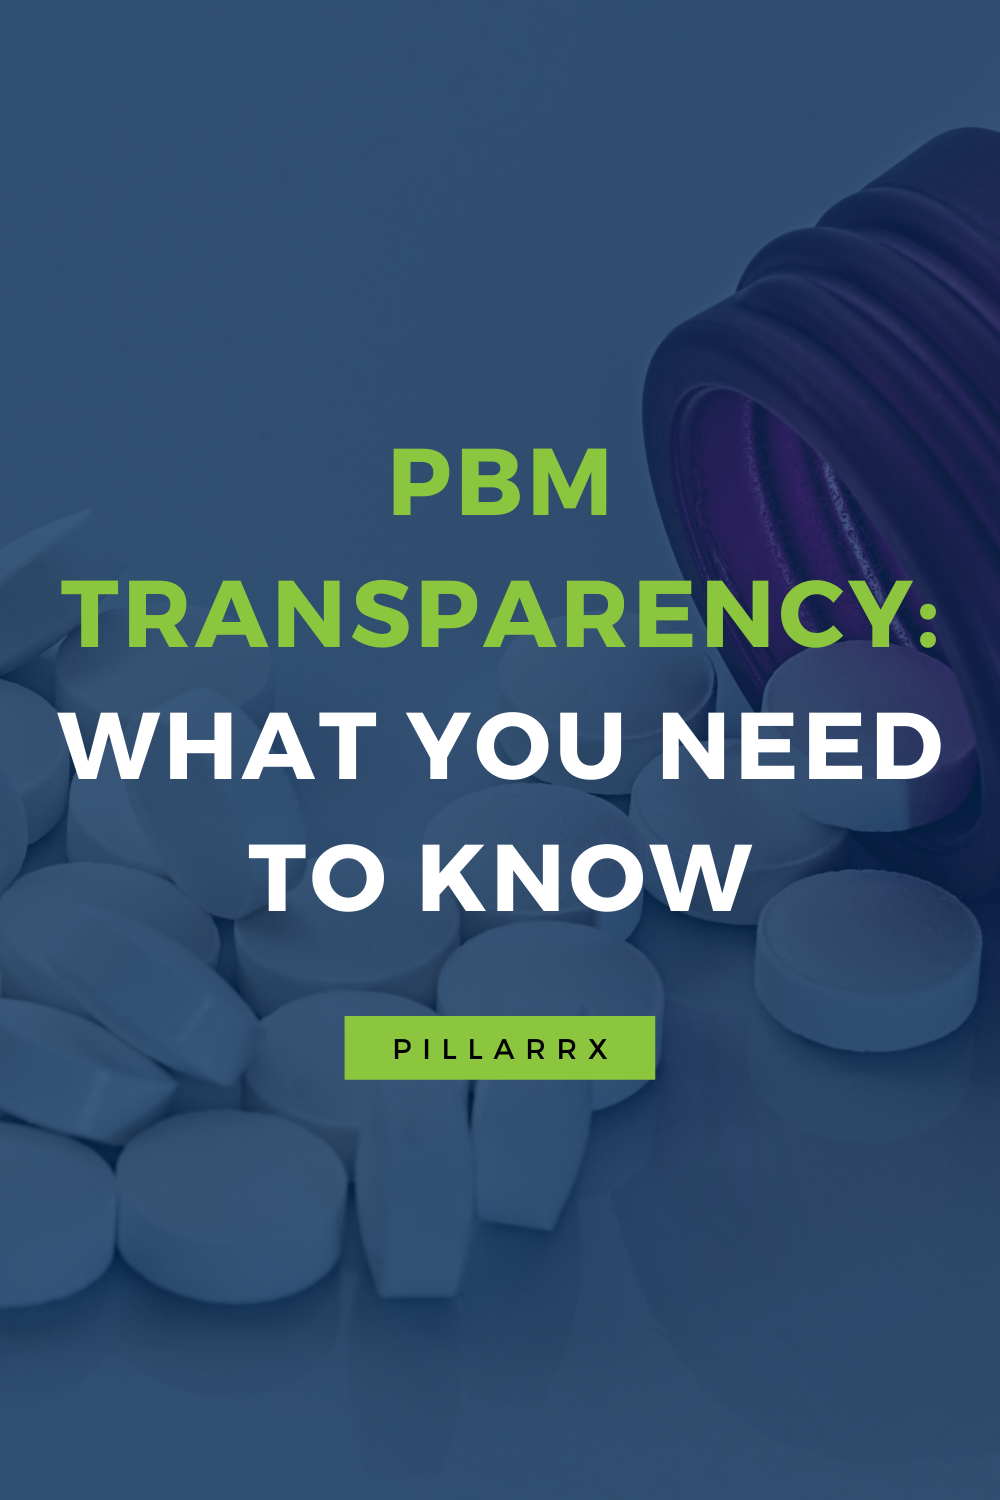 pbm-transparency-what-you-need-to-know-pillarrx-consulting-llc